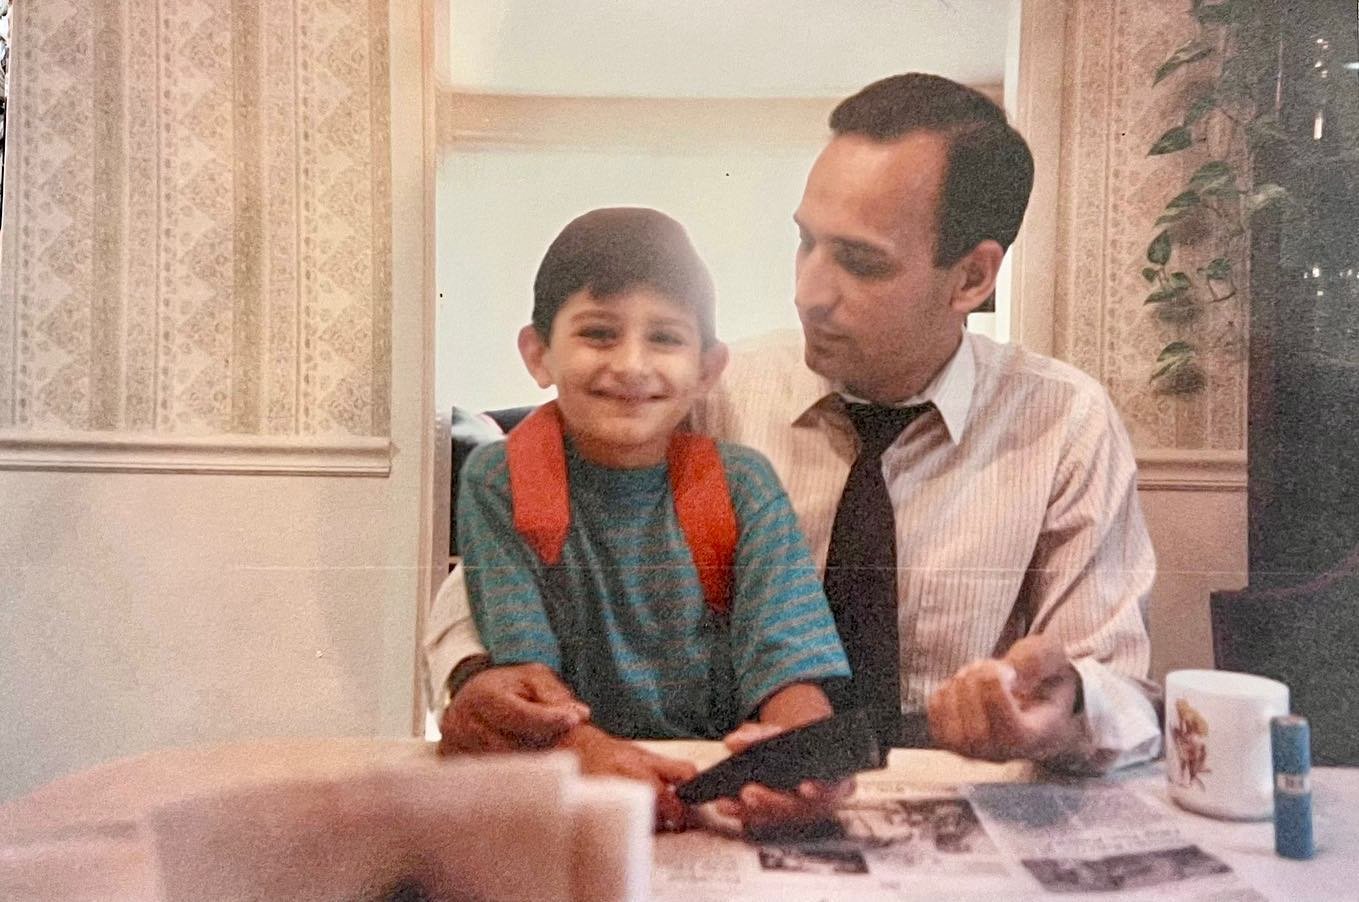 30 Days of stories (wisdom): A wisdom from El-Hibri Foundation President Farhan Latif. 

&ldquo;There is so much wisdom that my father imparted to me growing up that continues to guide me, but one in particular that I think about often is both his ex